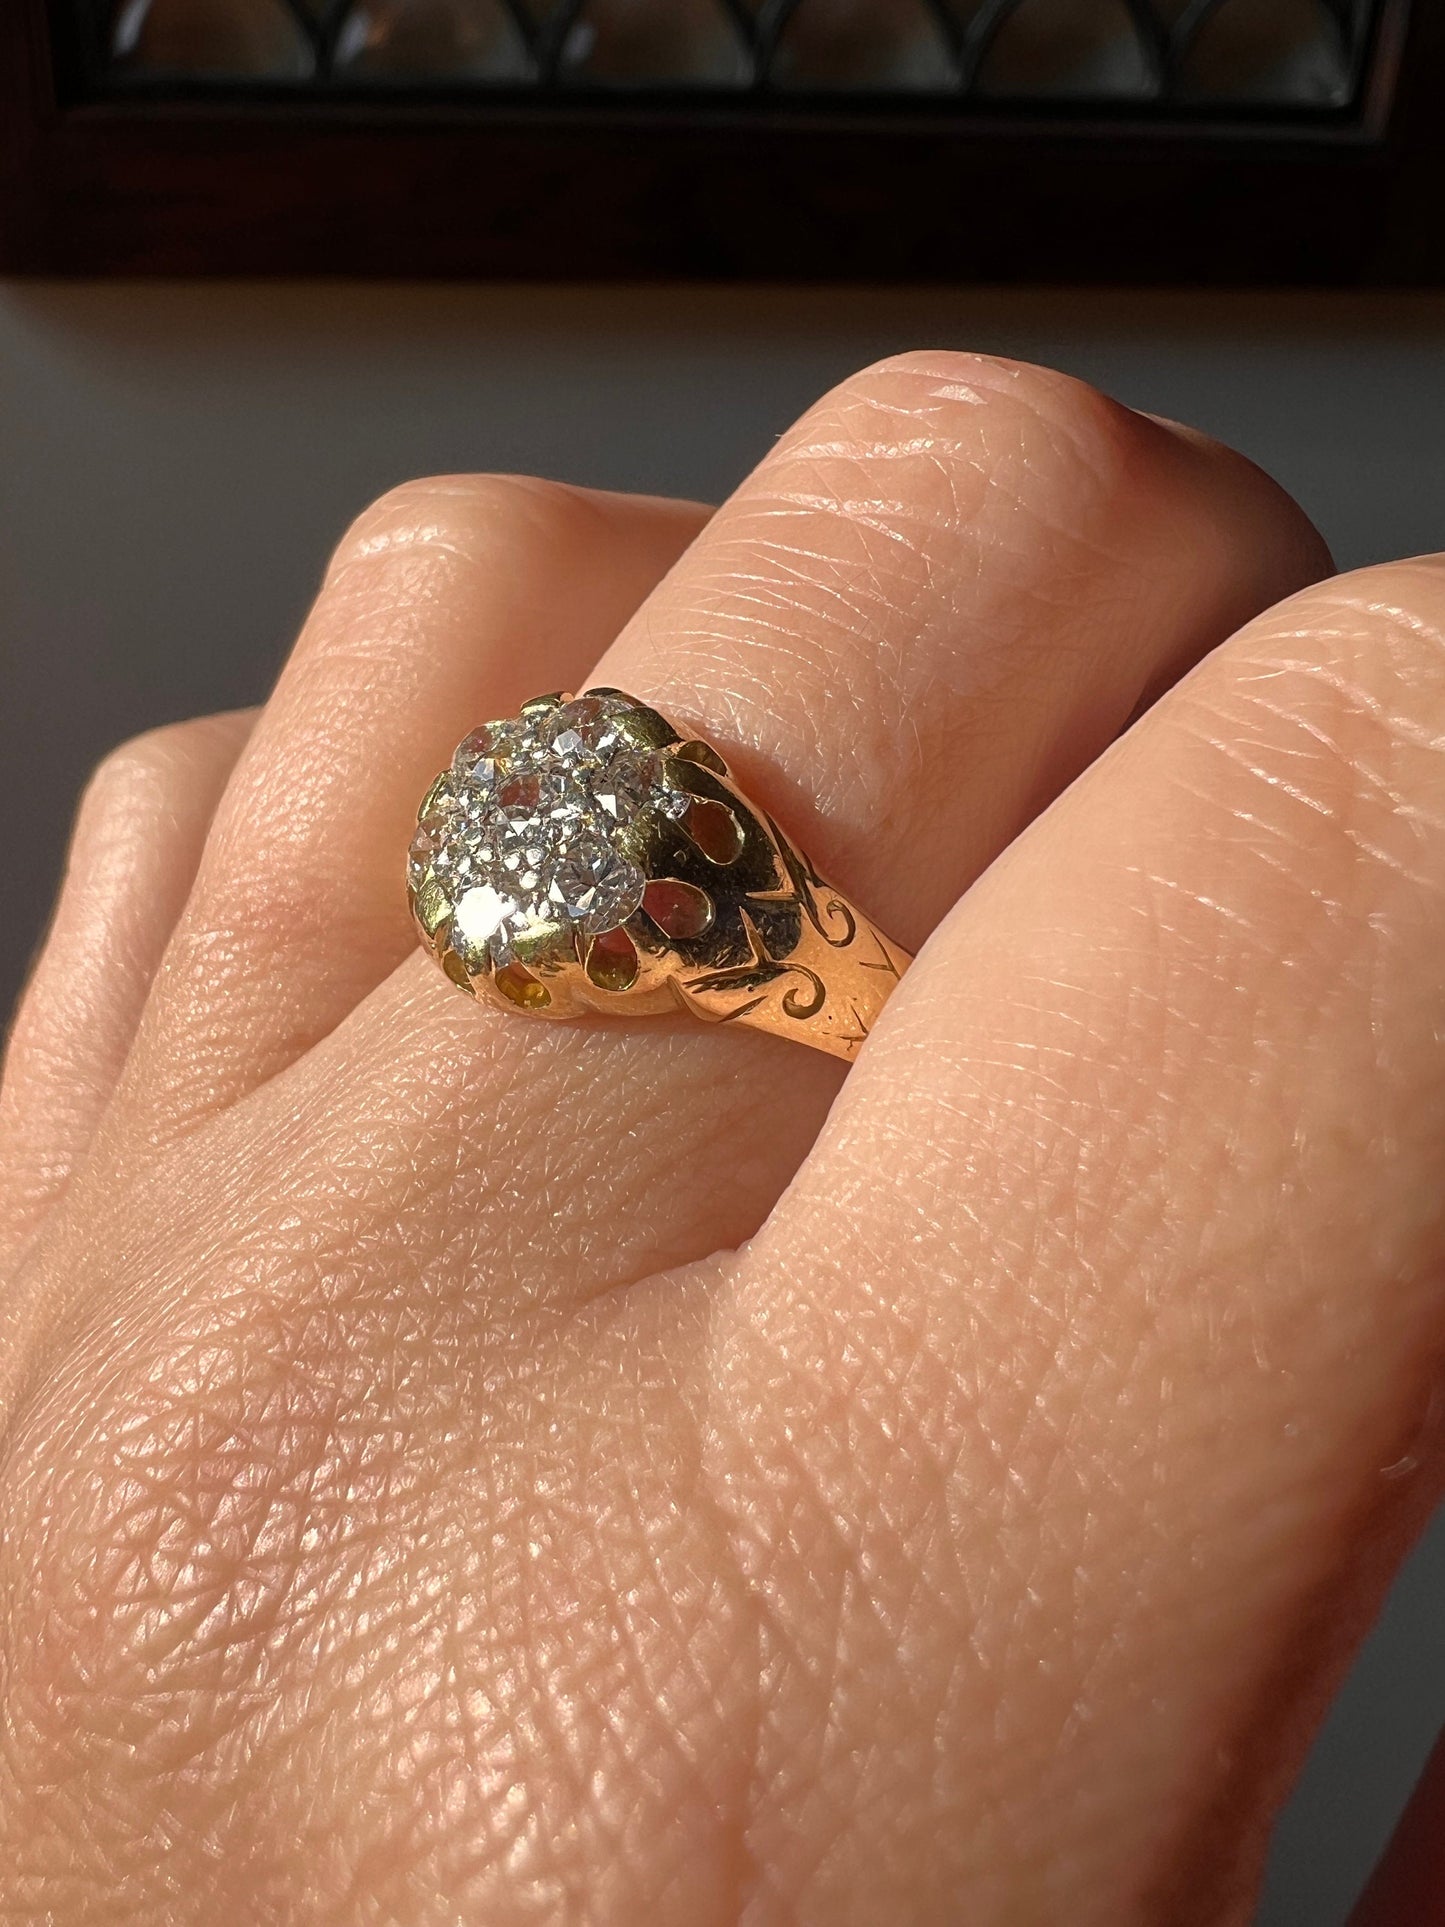 ANTIQUE 1 Carat Gent's Old Mine Cut DIAMOND Cluster Ring 7g 18k Gold Gift Stacker Band OMC Victorian Halo Buttercup Belcher Man Unisex Large